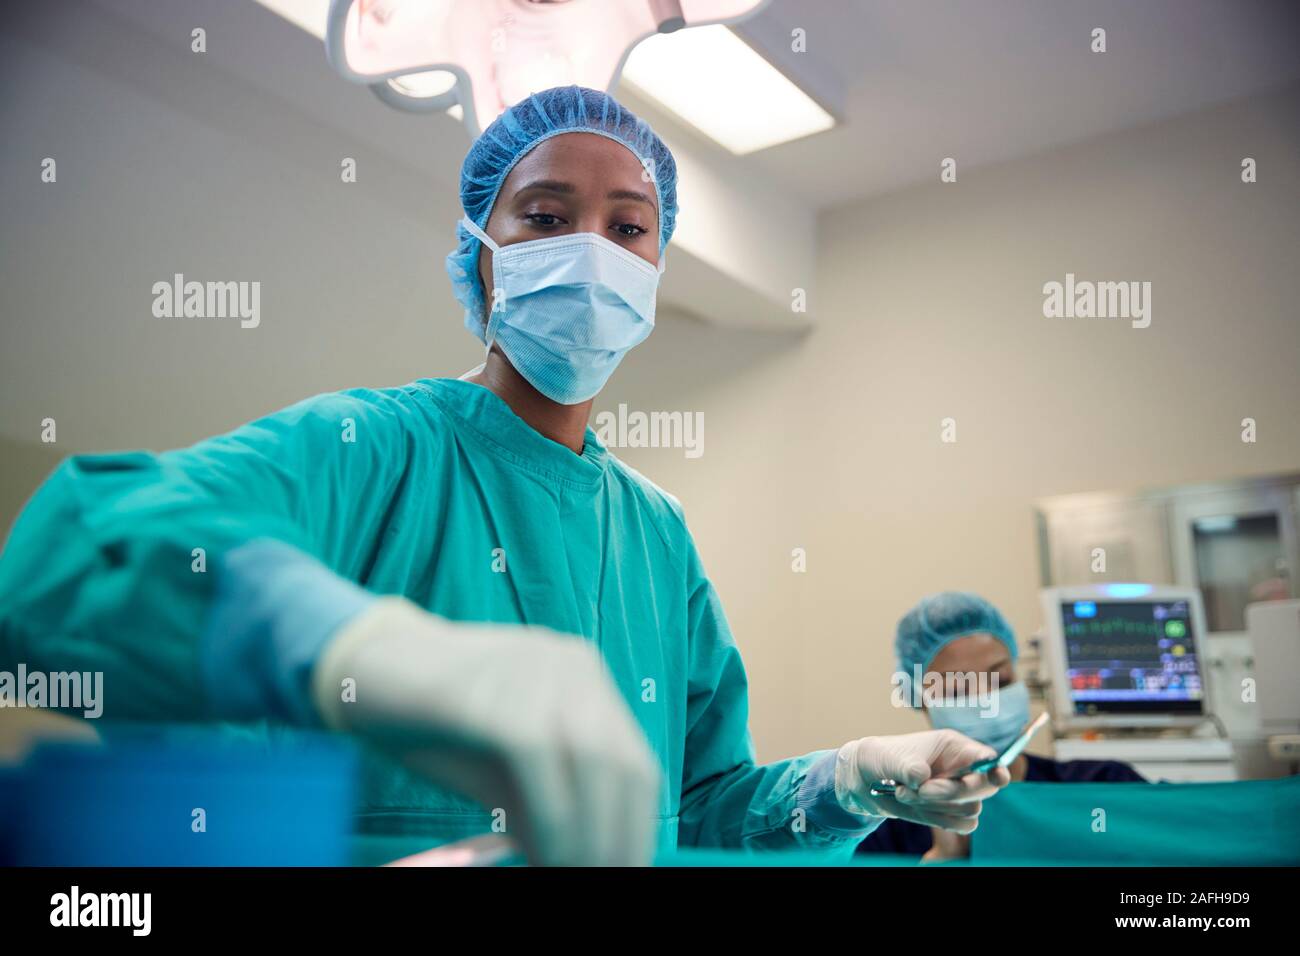 Female Surgical Team Working On Patient In Hospital Operating Theatre Stock Photo